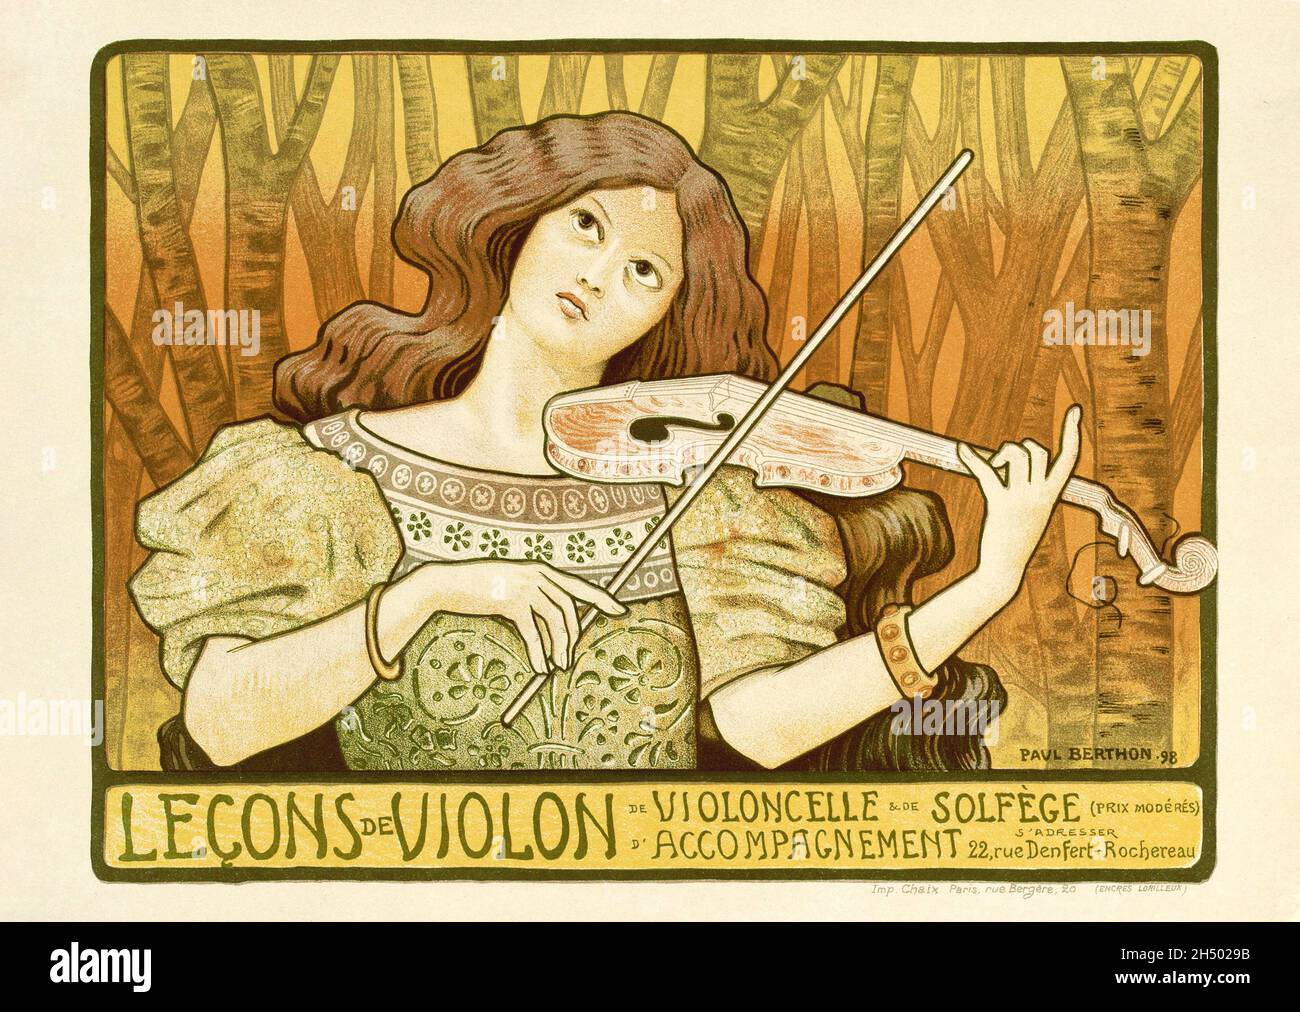 French Vintage Poster advertising  violine lessons by Paul Berthon, 1898. Stock Photo